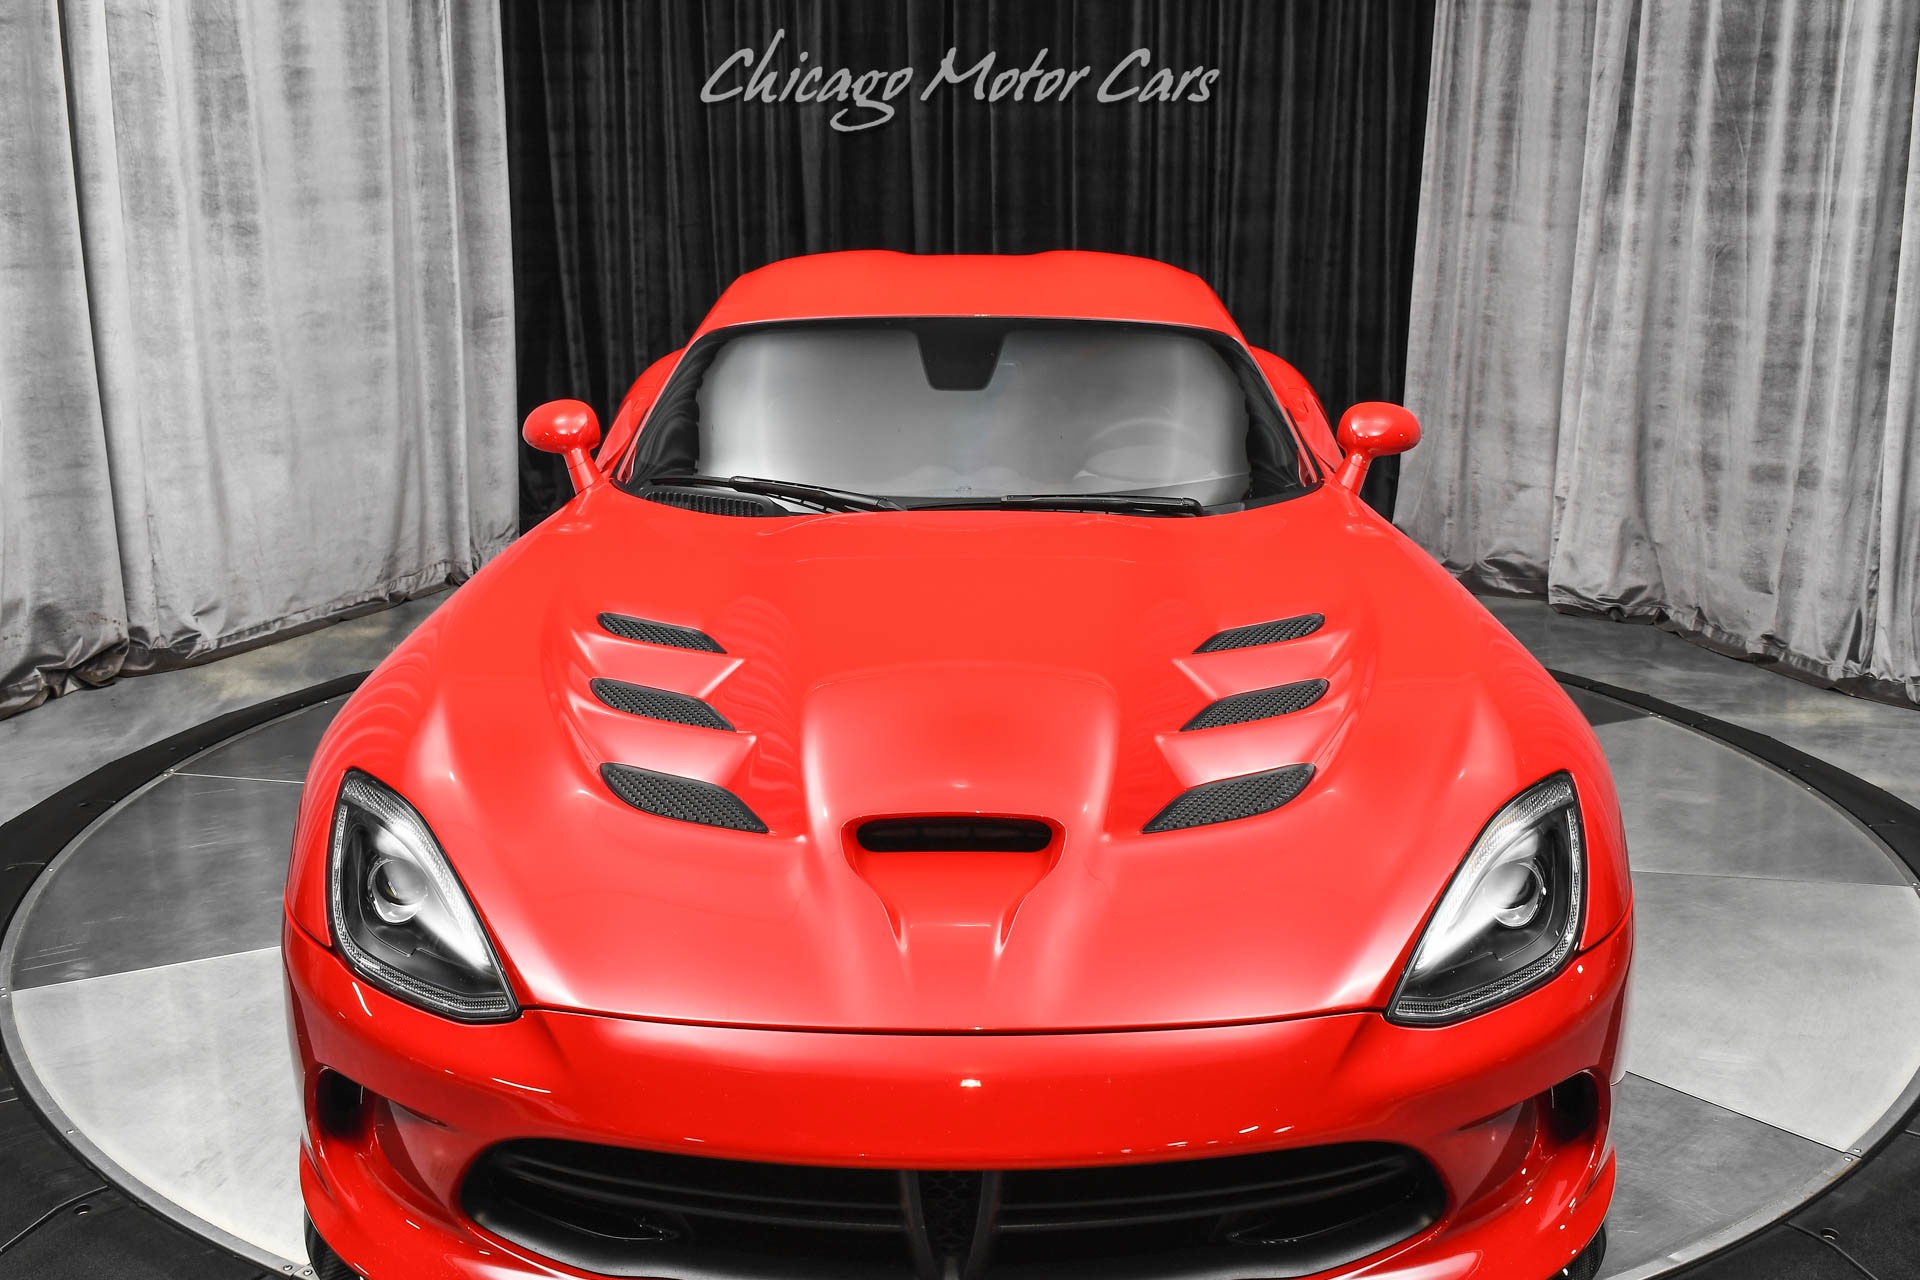 Revealed: New 2013 SRT Viper Accessories, Including Exhaust and Interior  Mods